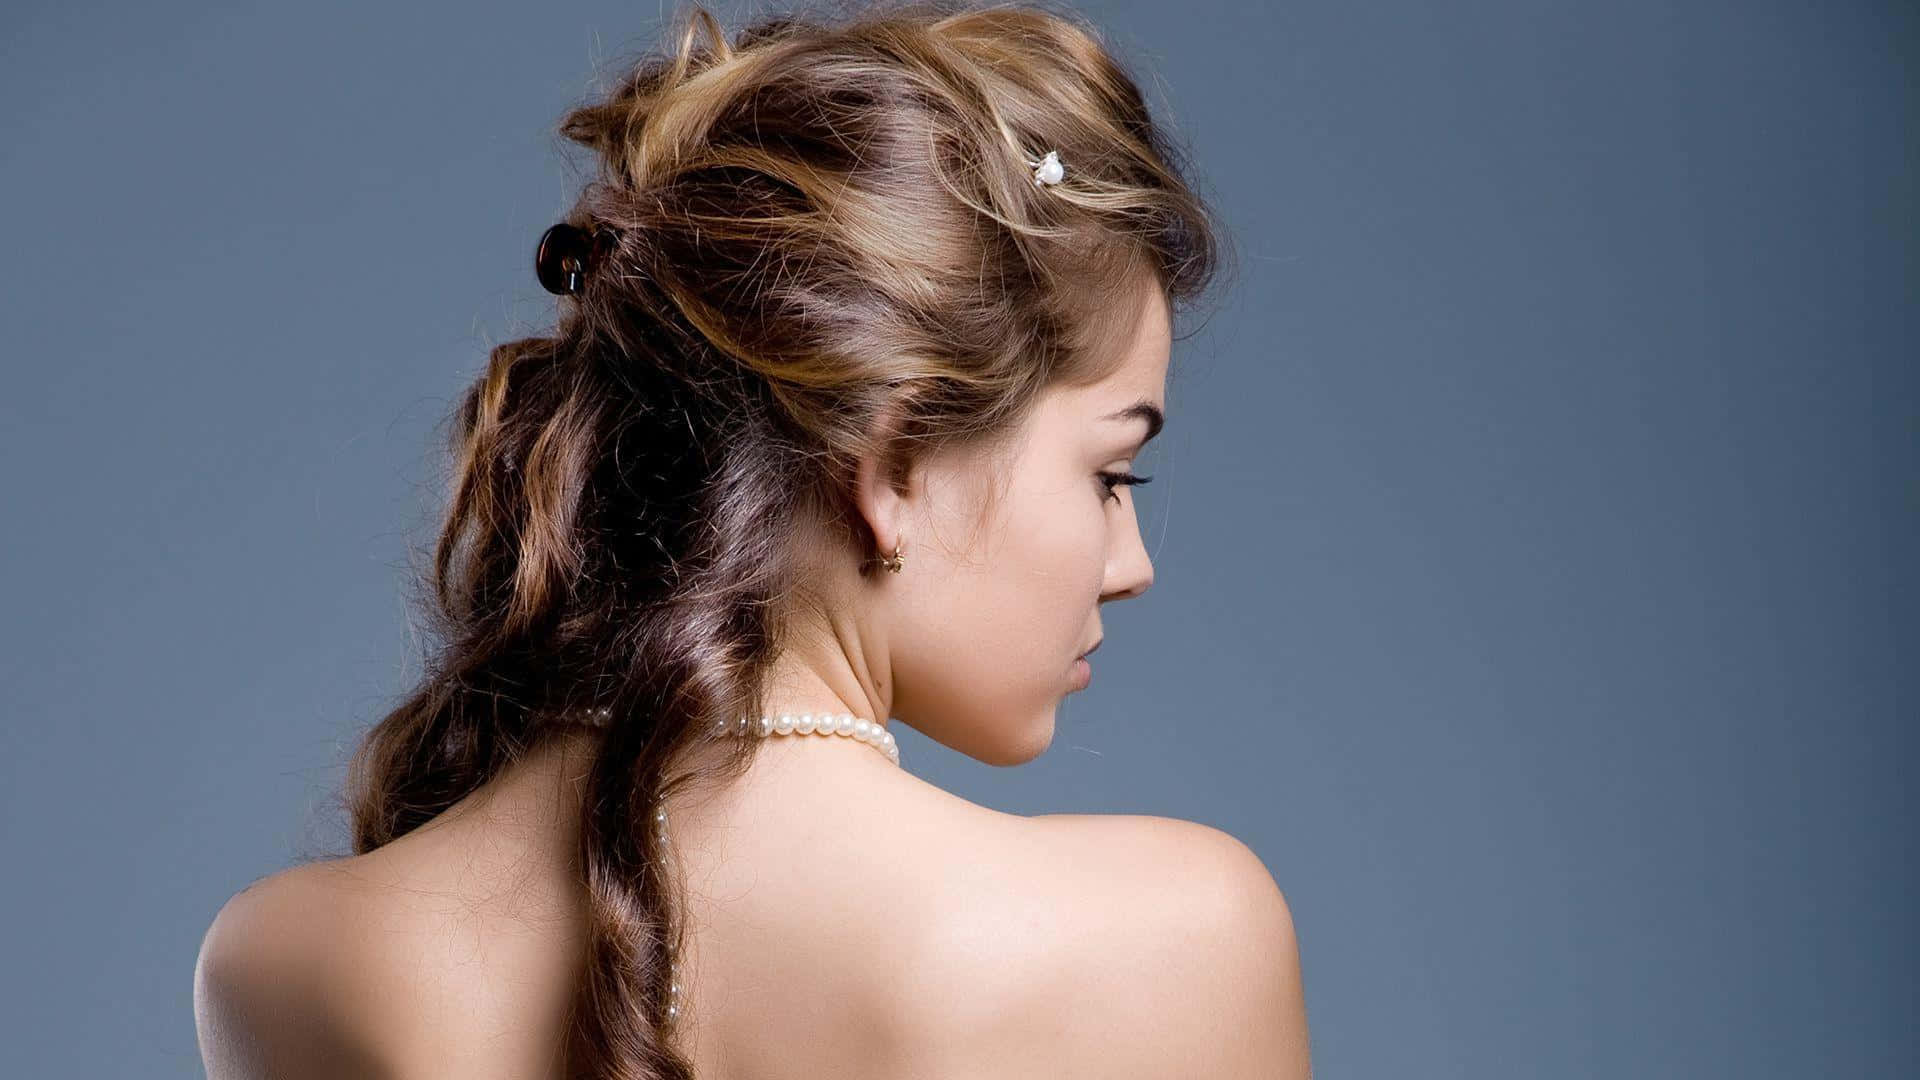 Girl In Messy Braided Hair Style Picture